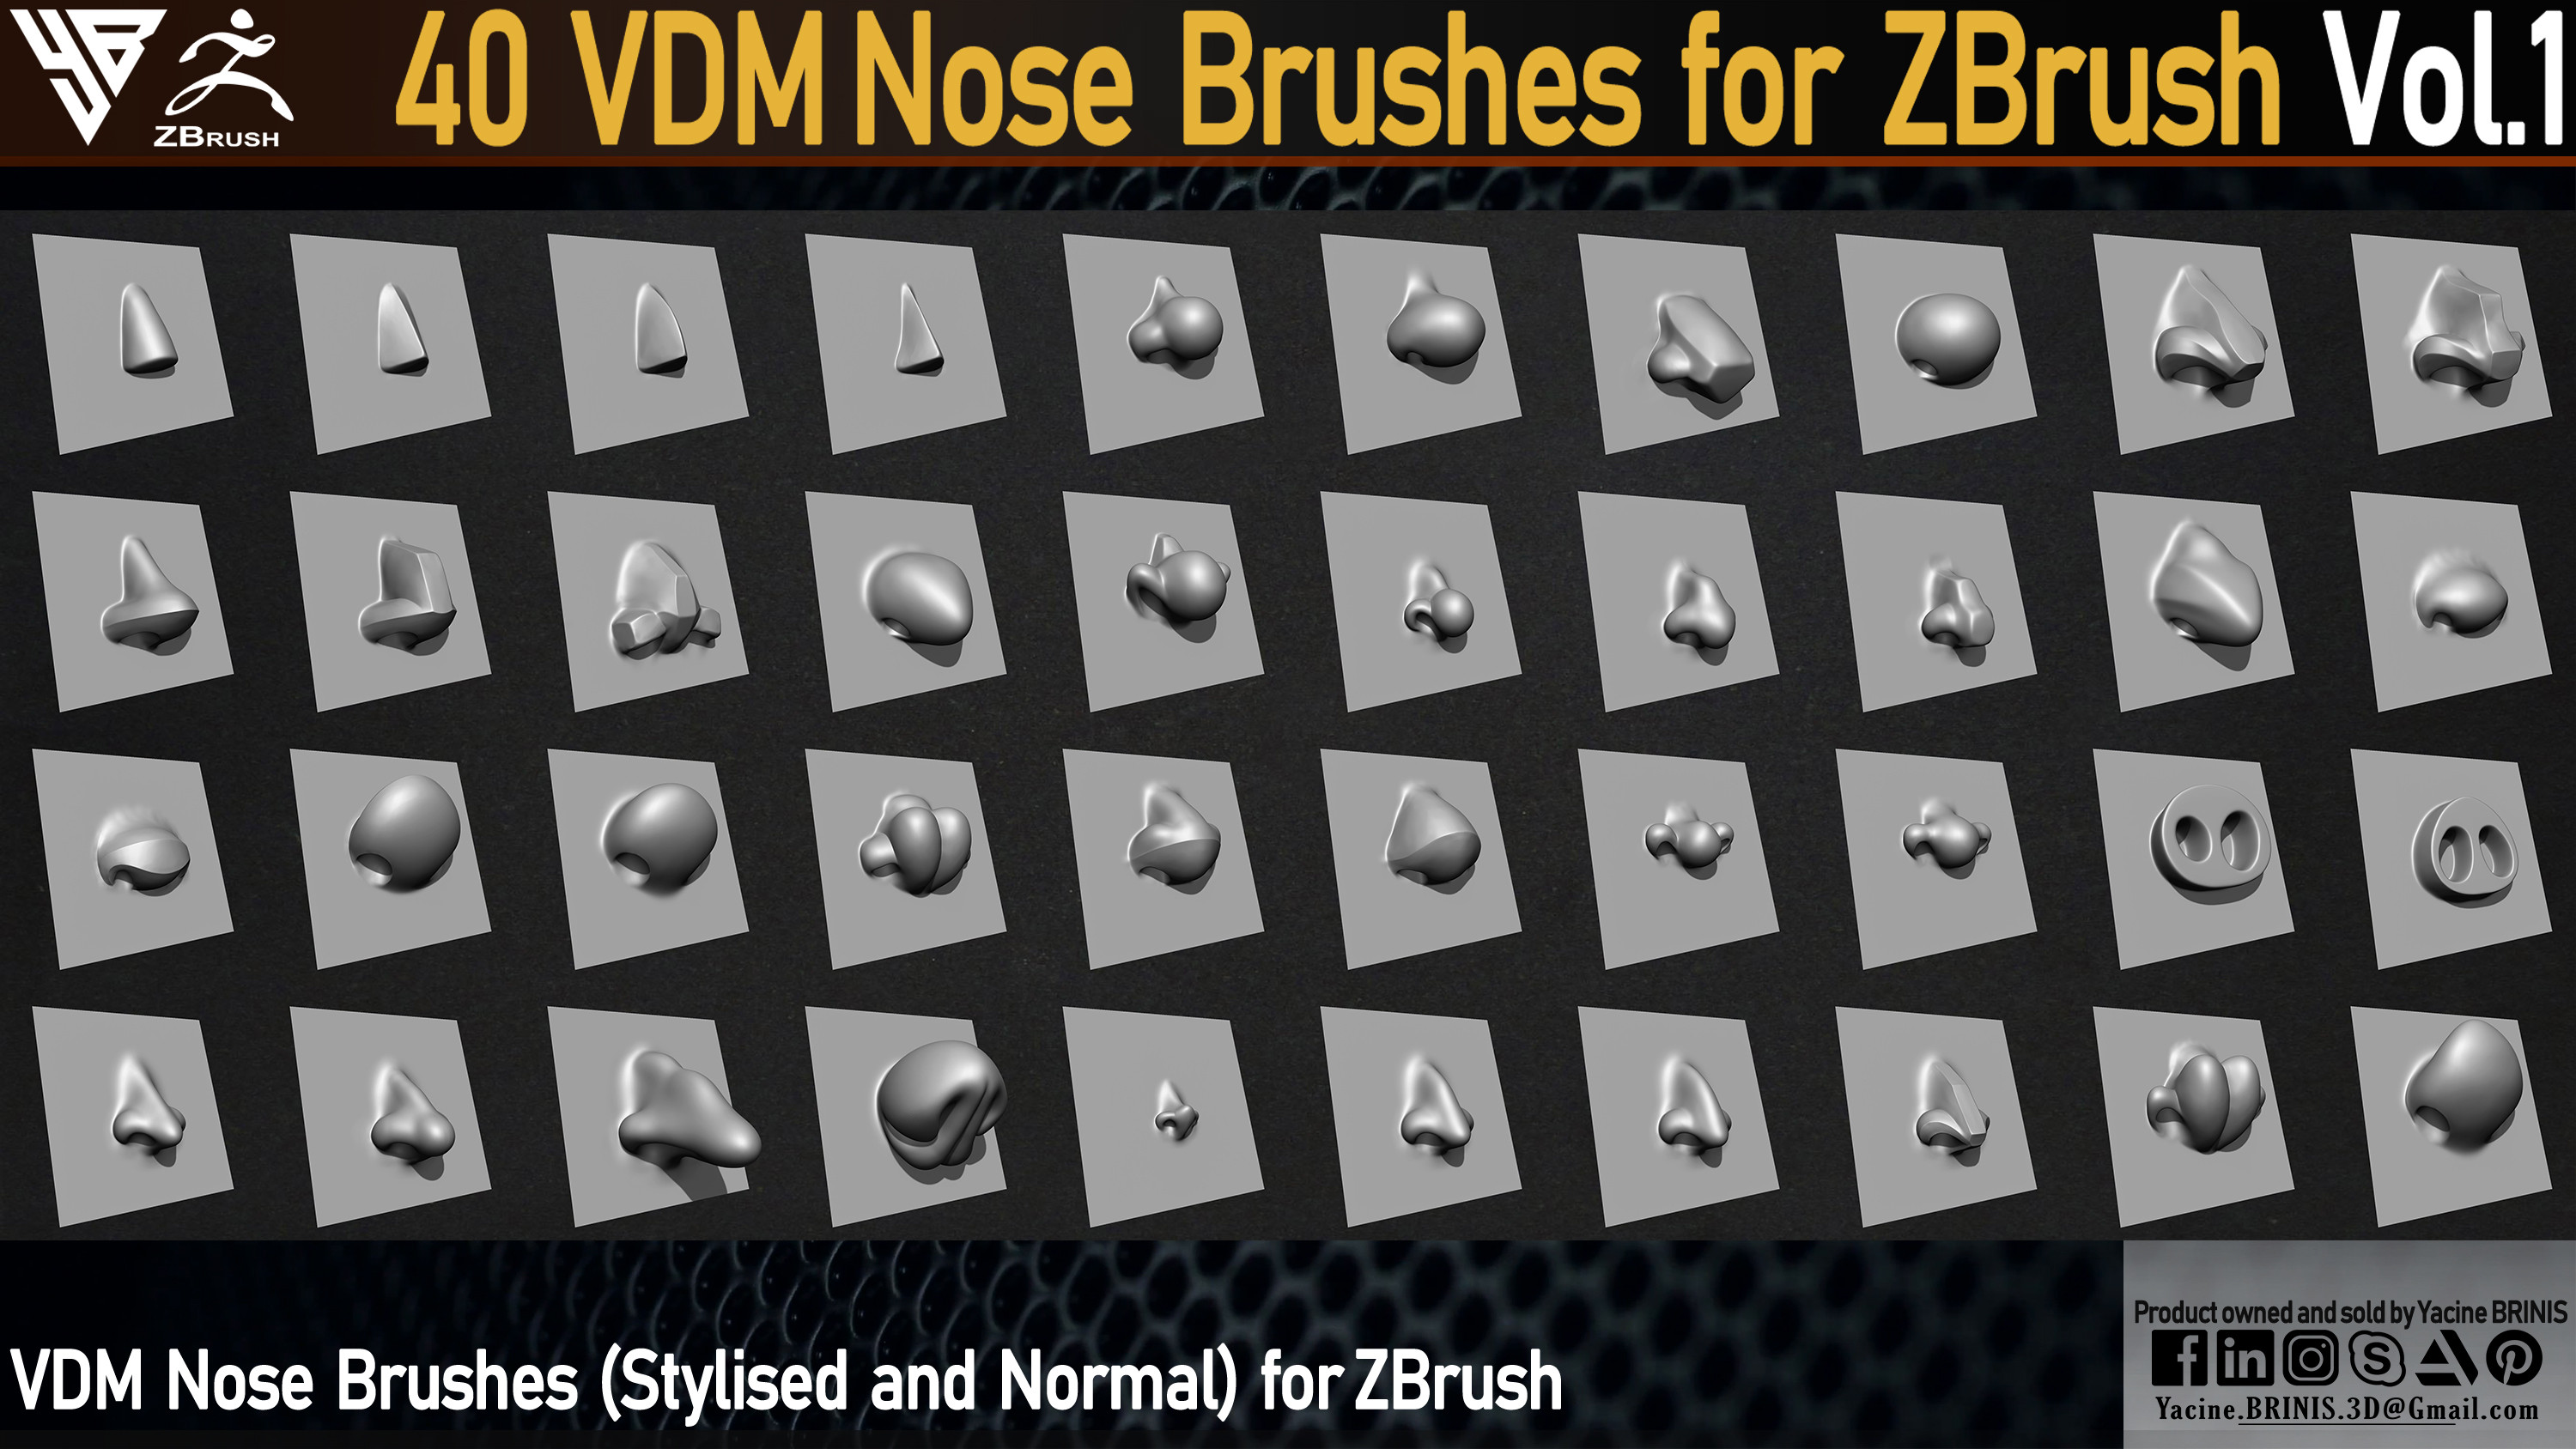 40 VDM Nose Brushes for ZBrush Vol 01 (Stylised and Normal) by Yacine BRINIS Set 03